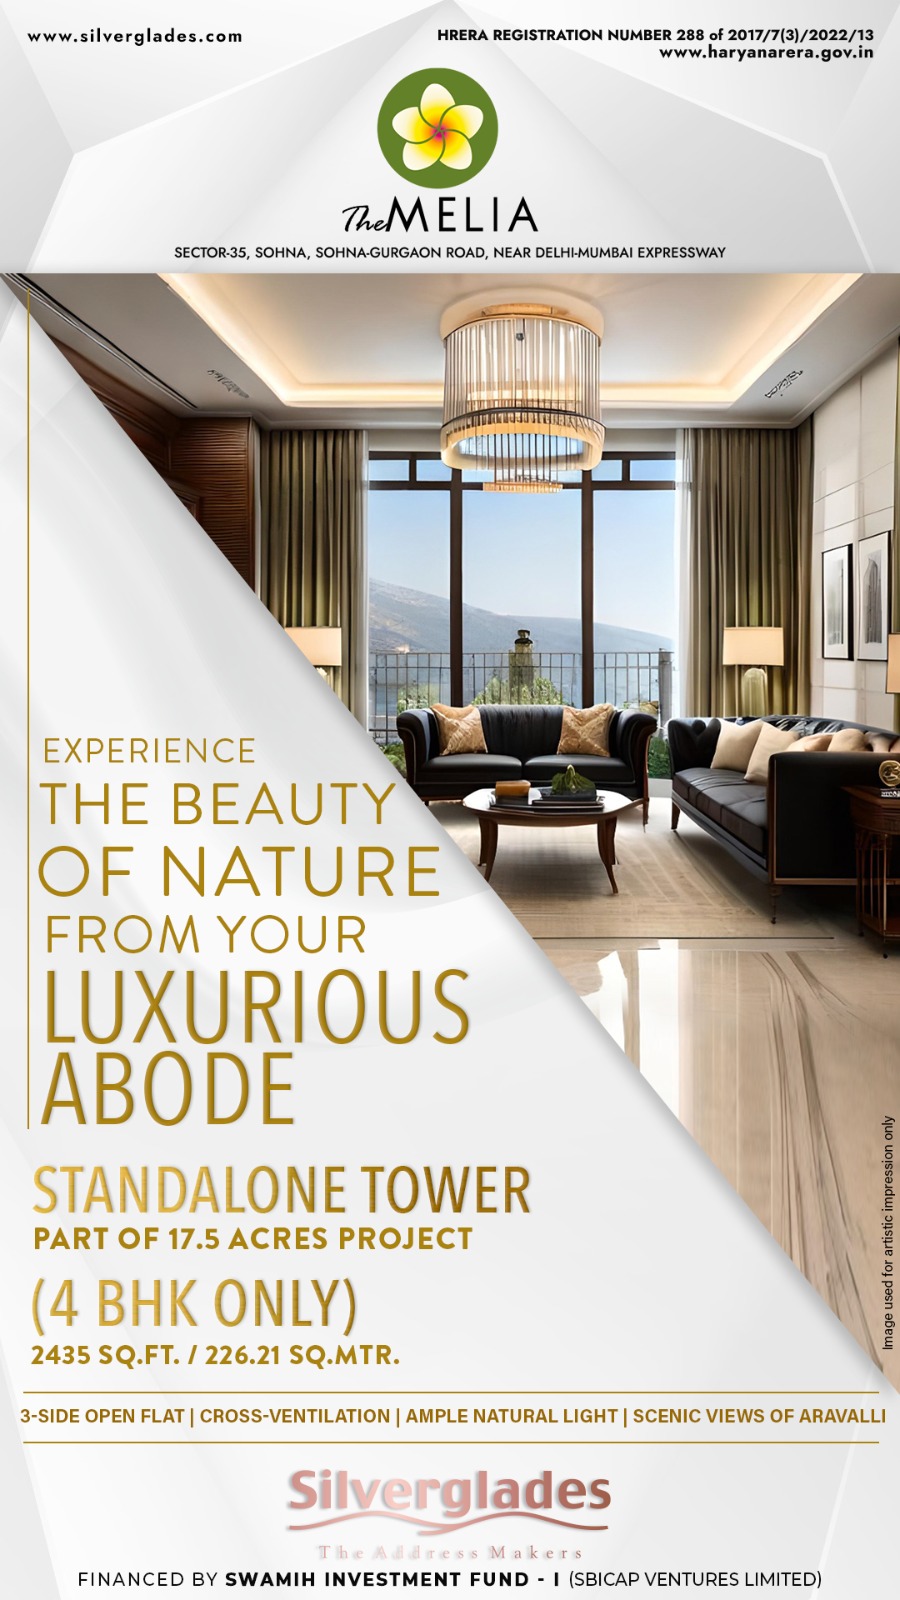 Silverglades The Melia: Exclusive 4 BHK Residences Amidst Nature in Sohna Update